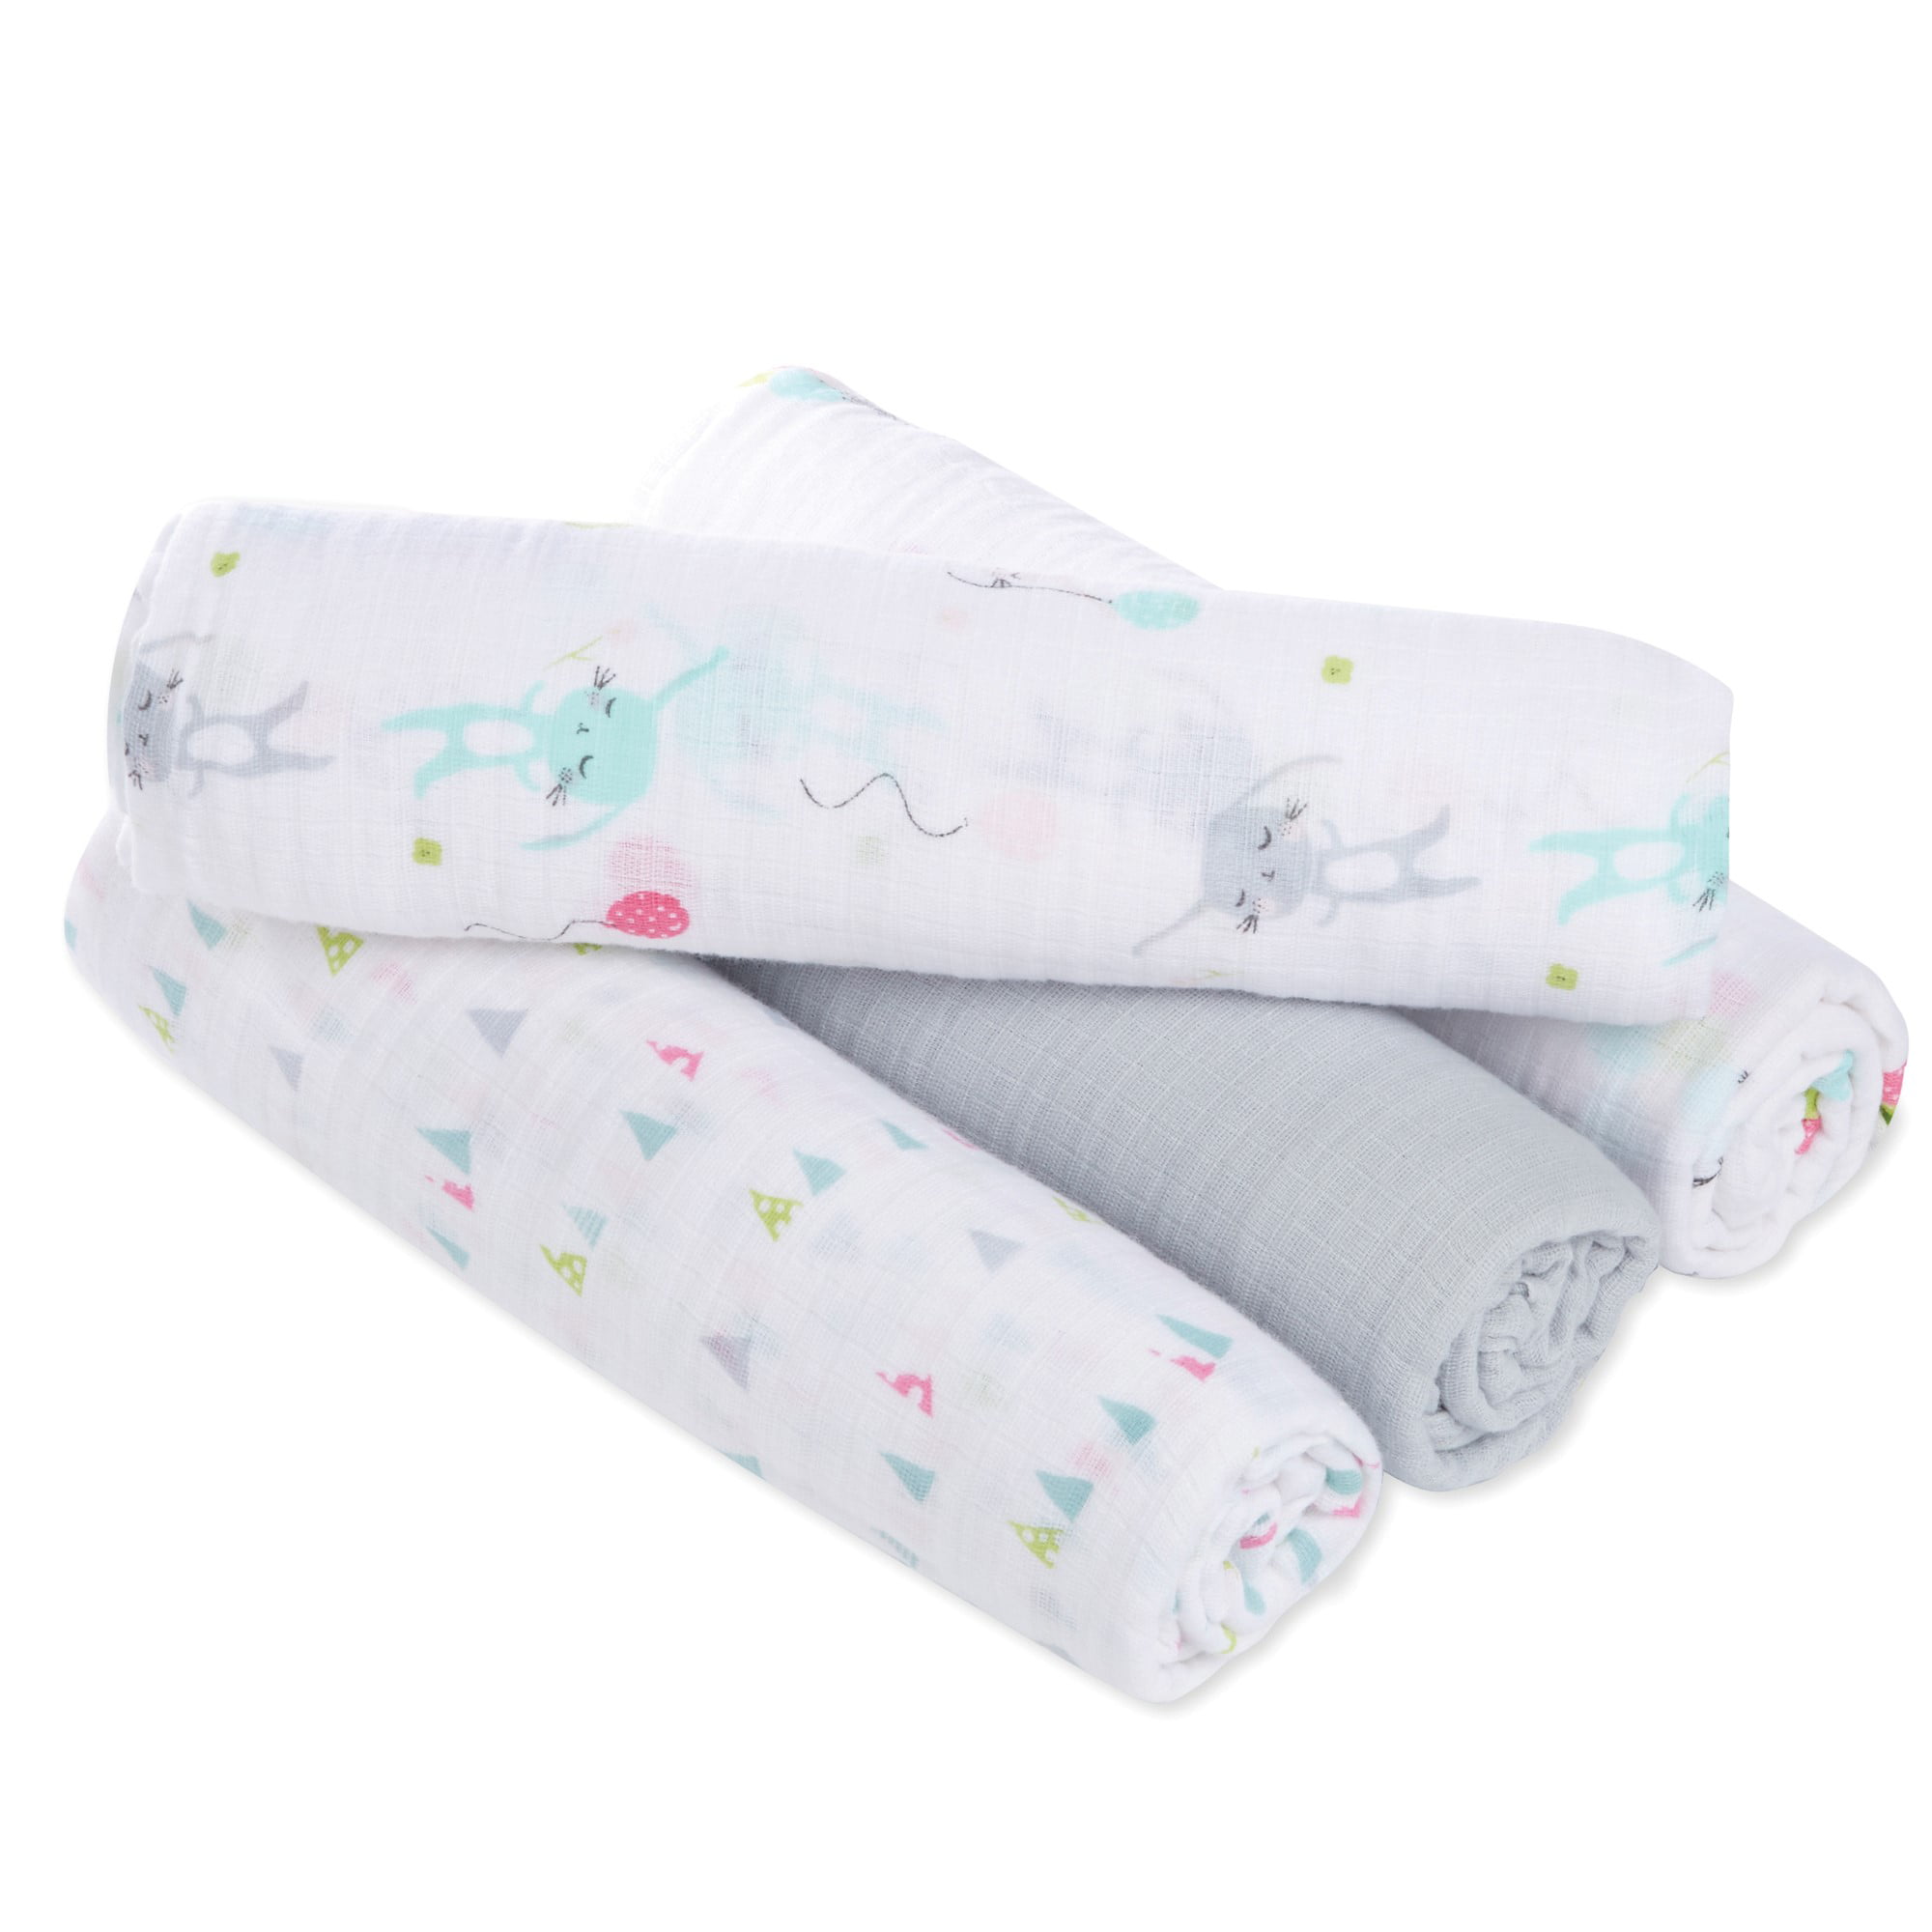 Aden Anais Swaddleplus Multi-Use Muslin Swaddle Baby Blankets Pack of 4 NEW 